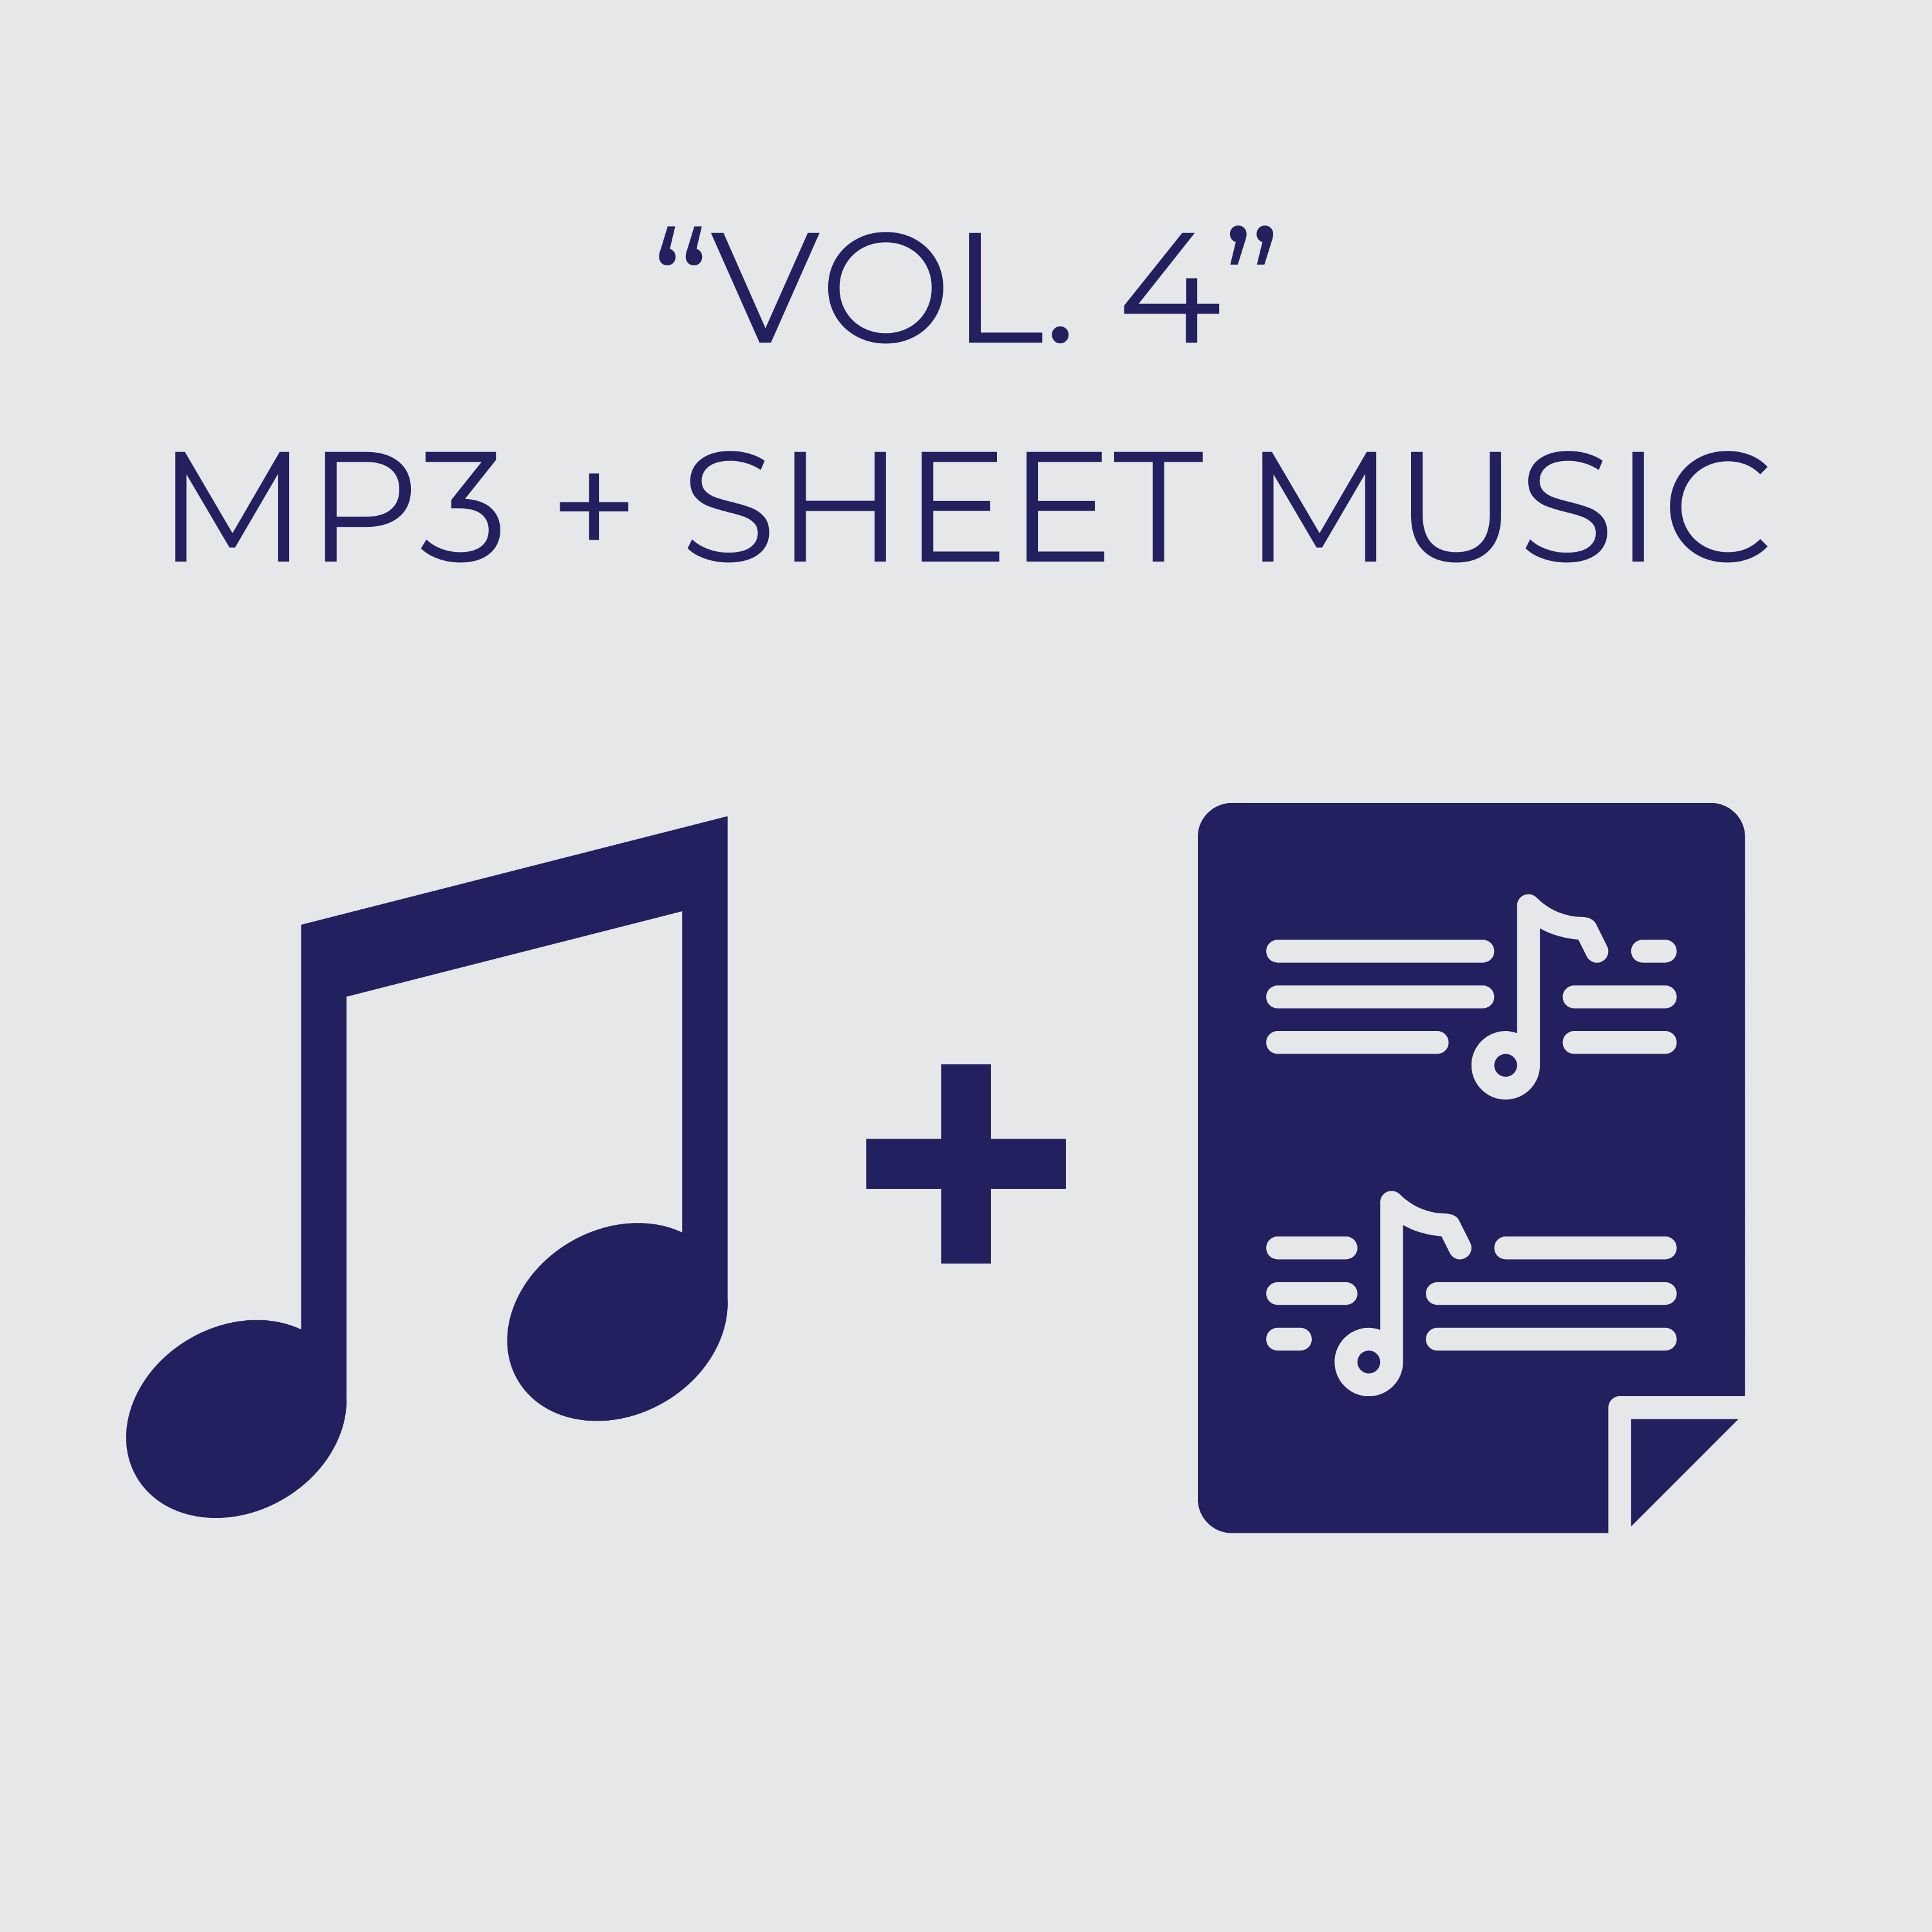 "The Collection, Vol. 4" MP3 and Sheet Music Bundle